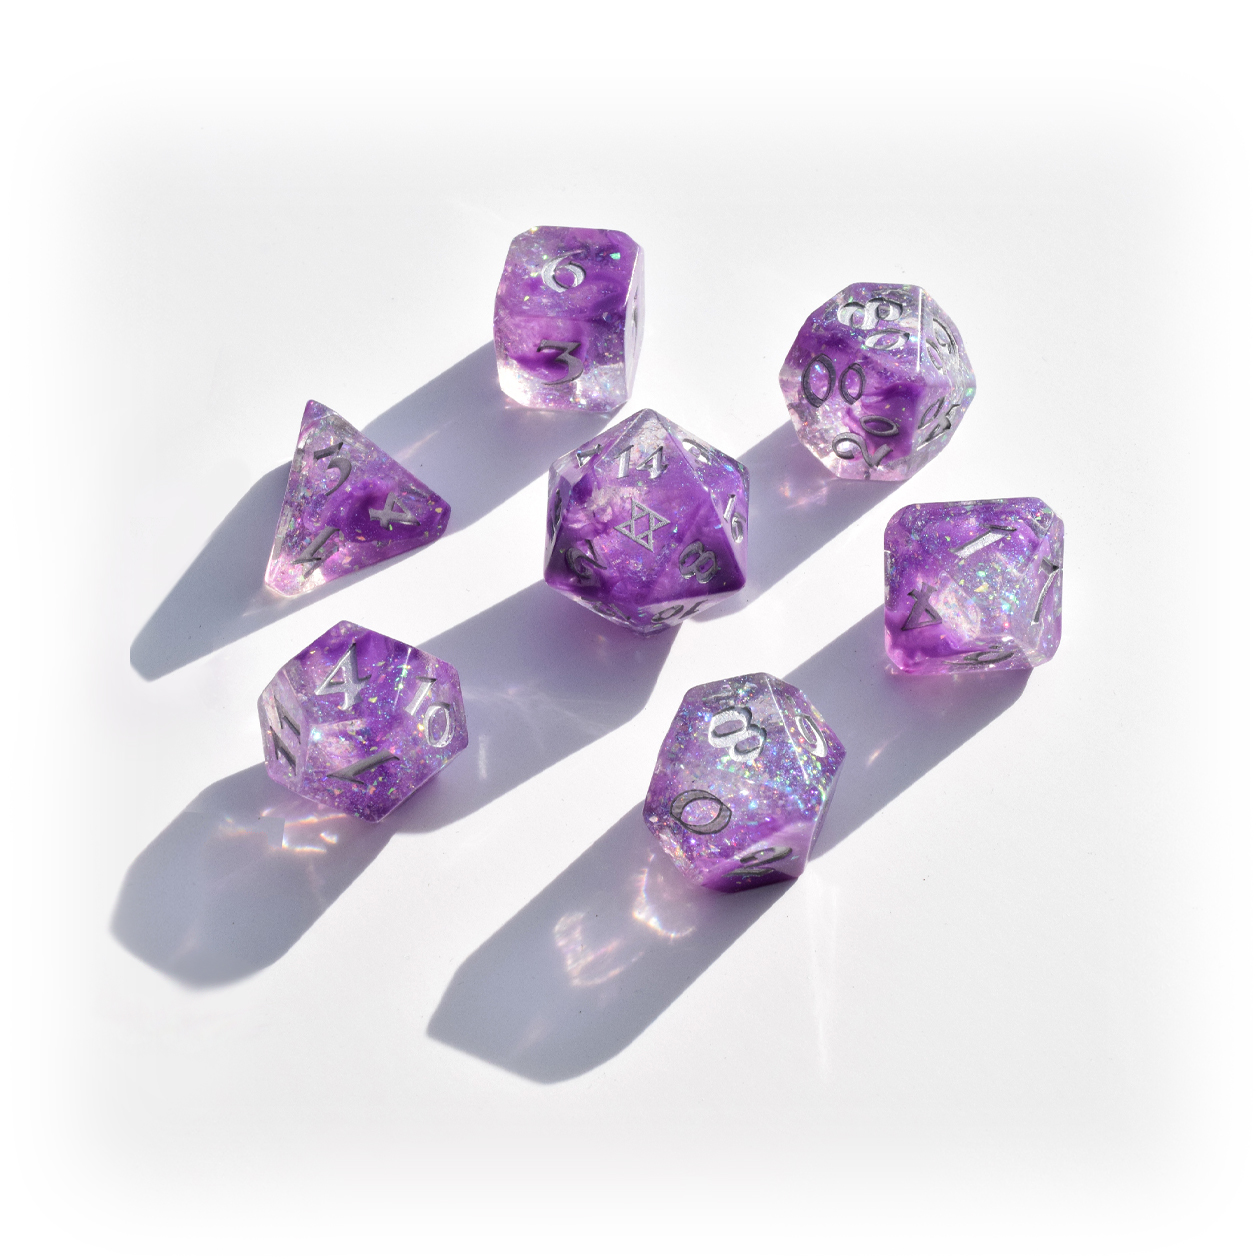 Image of a seven dice set: a D4, D6, D8, D10, D12, D20, and D100. The dice have a galaxy swirl inside them of dark purple, light purple, and clear with iridescent glitter flakes. The numbers are painted silver. The D20 has the BoB sigil on the 20 side.